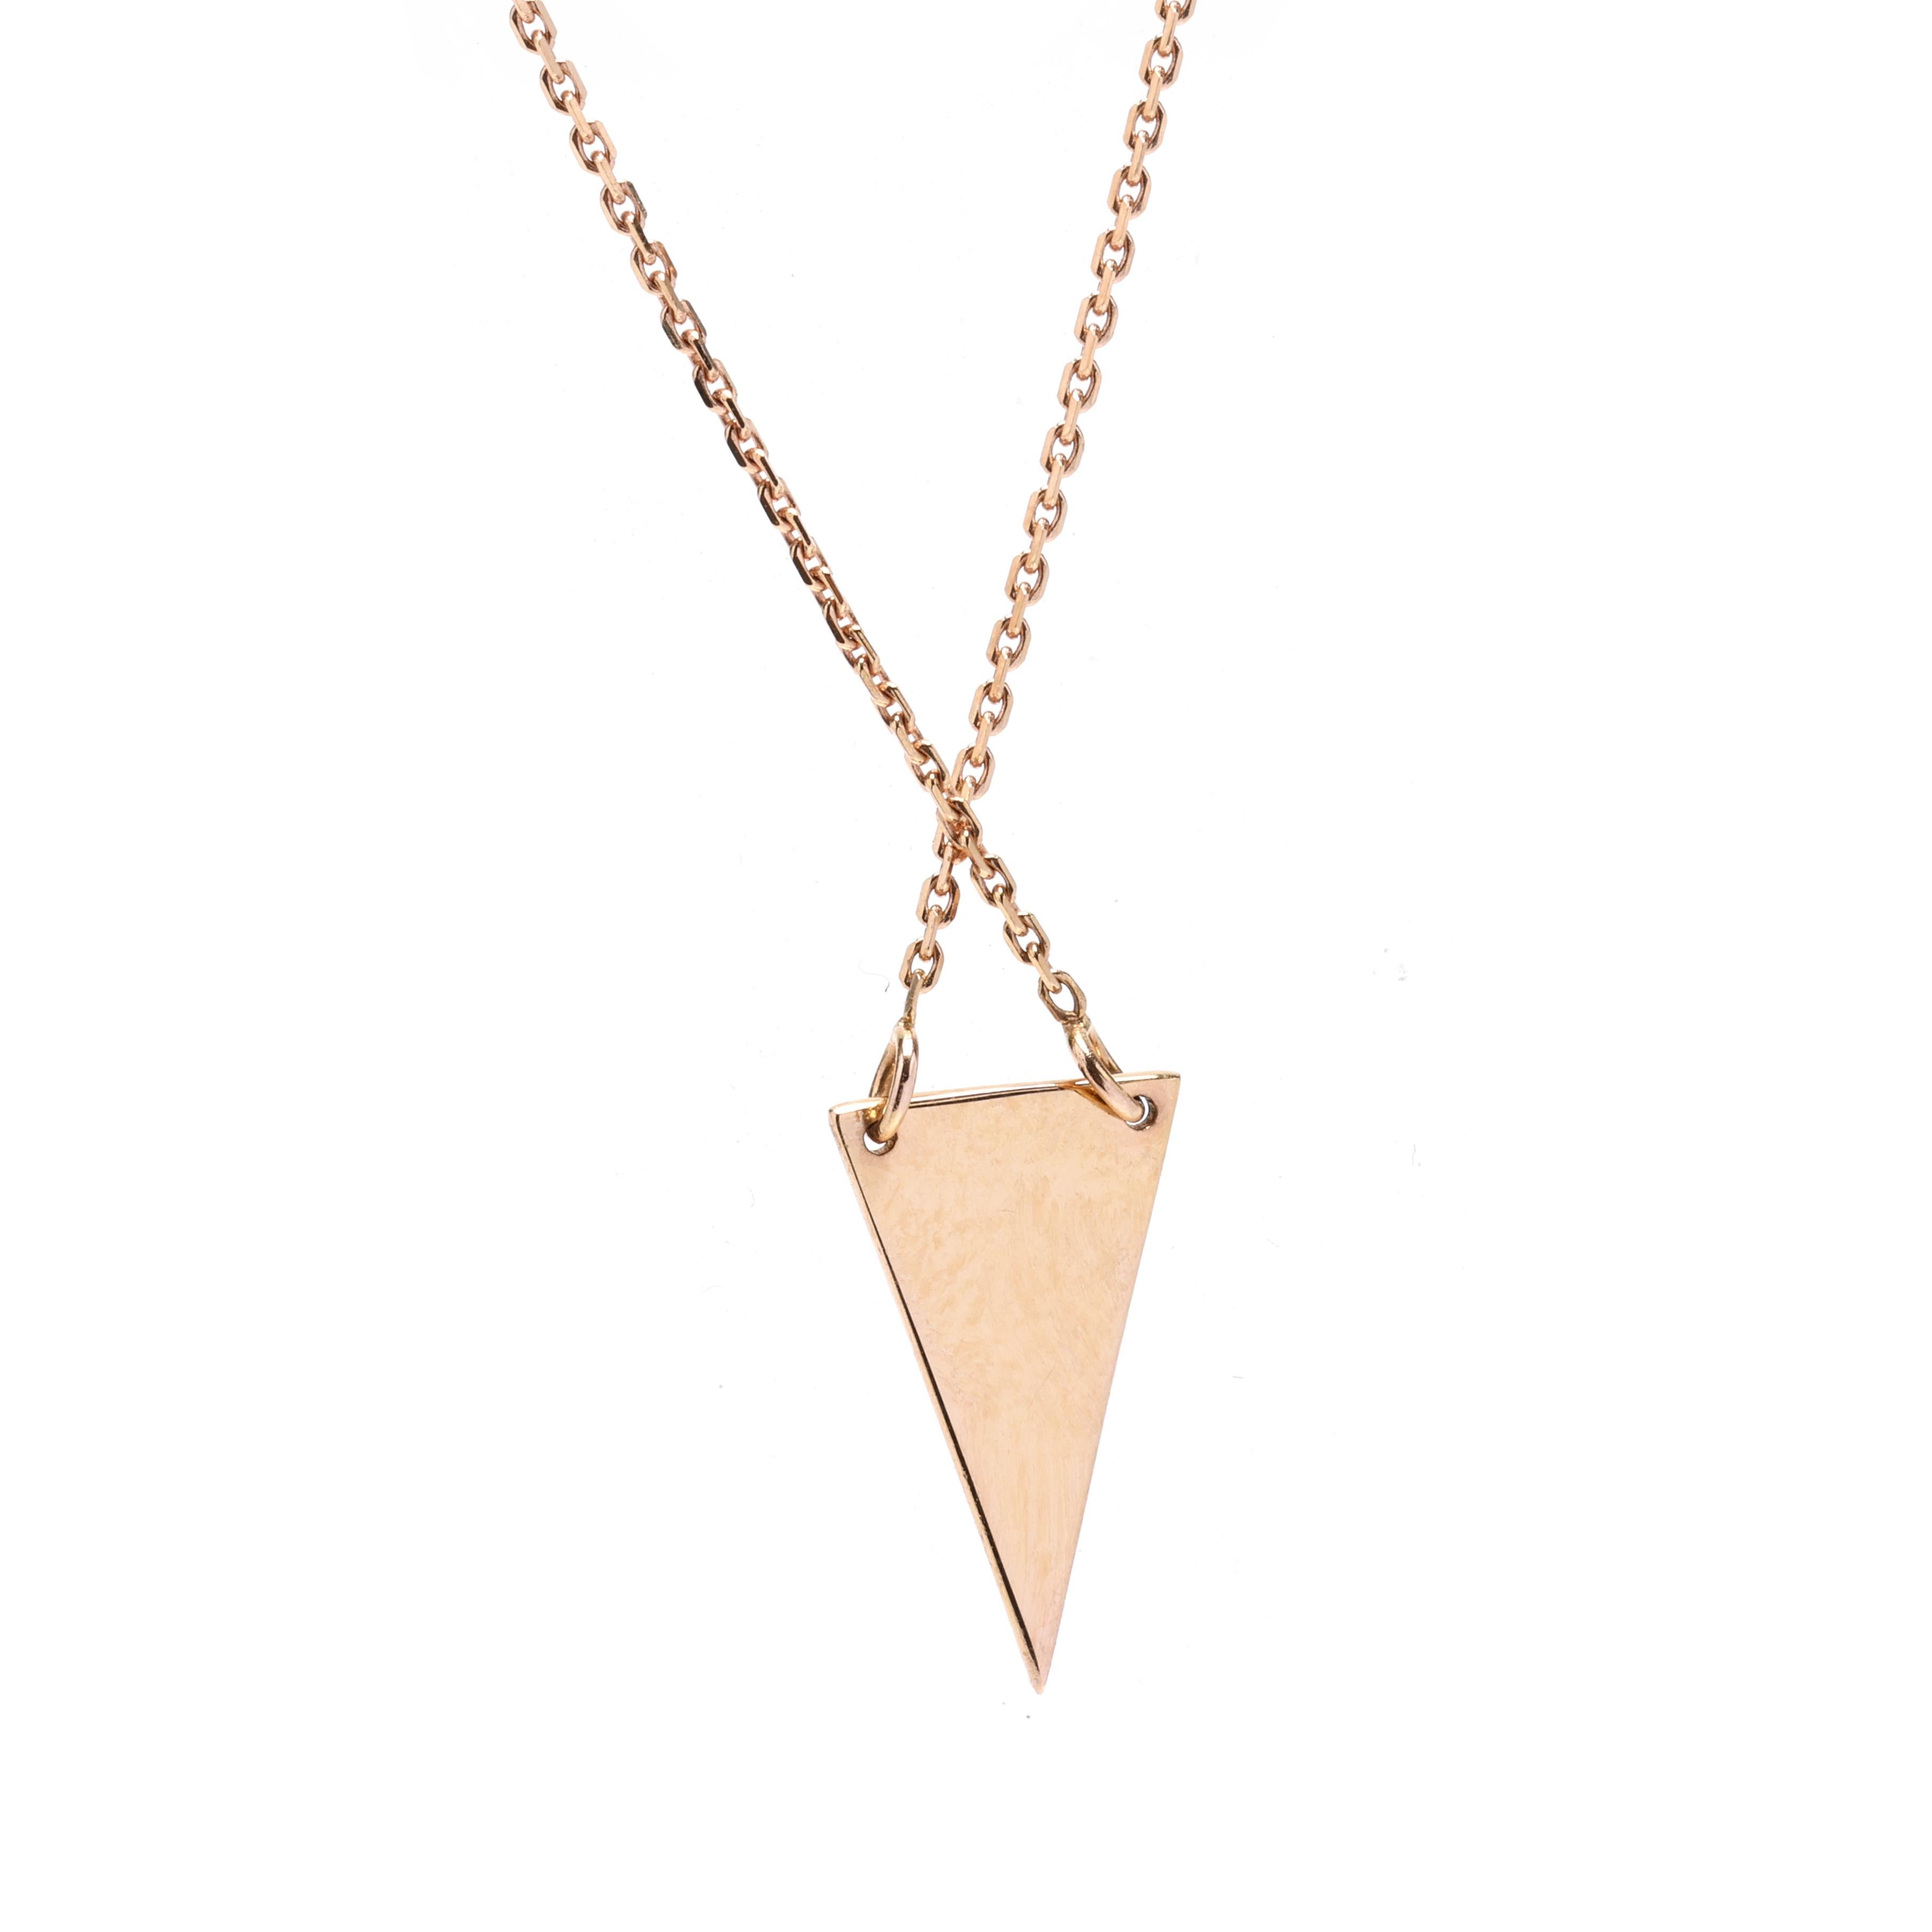 This delicate and dainty 14K rose gold triangle necklace is a minimalist yet stylish accessory. Measuring 16-18 inches in length, this pendant necklace is versatile and can be adjusted to suit your desired length. Crafted in 14K rose gold, this